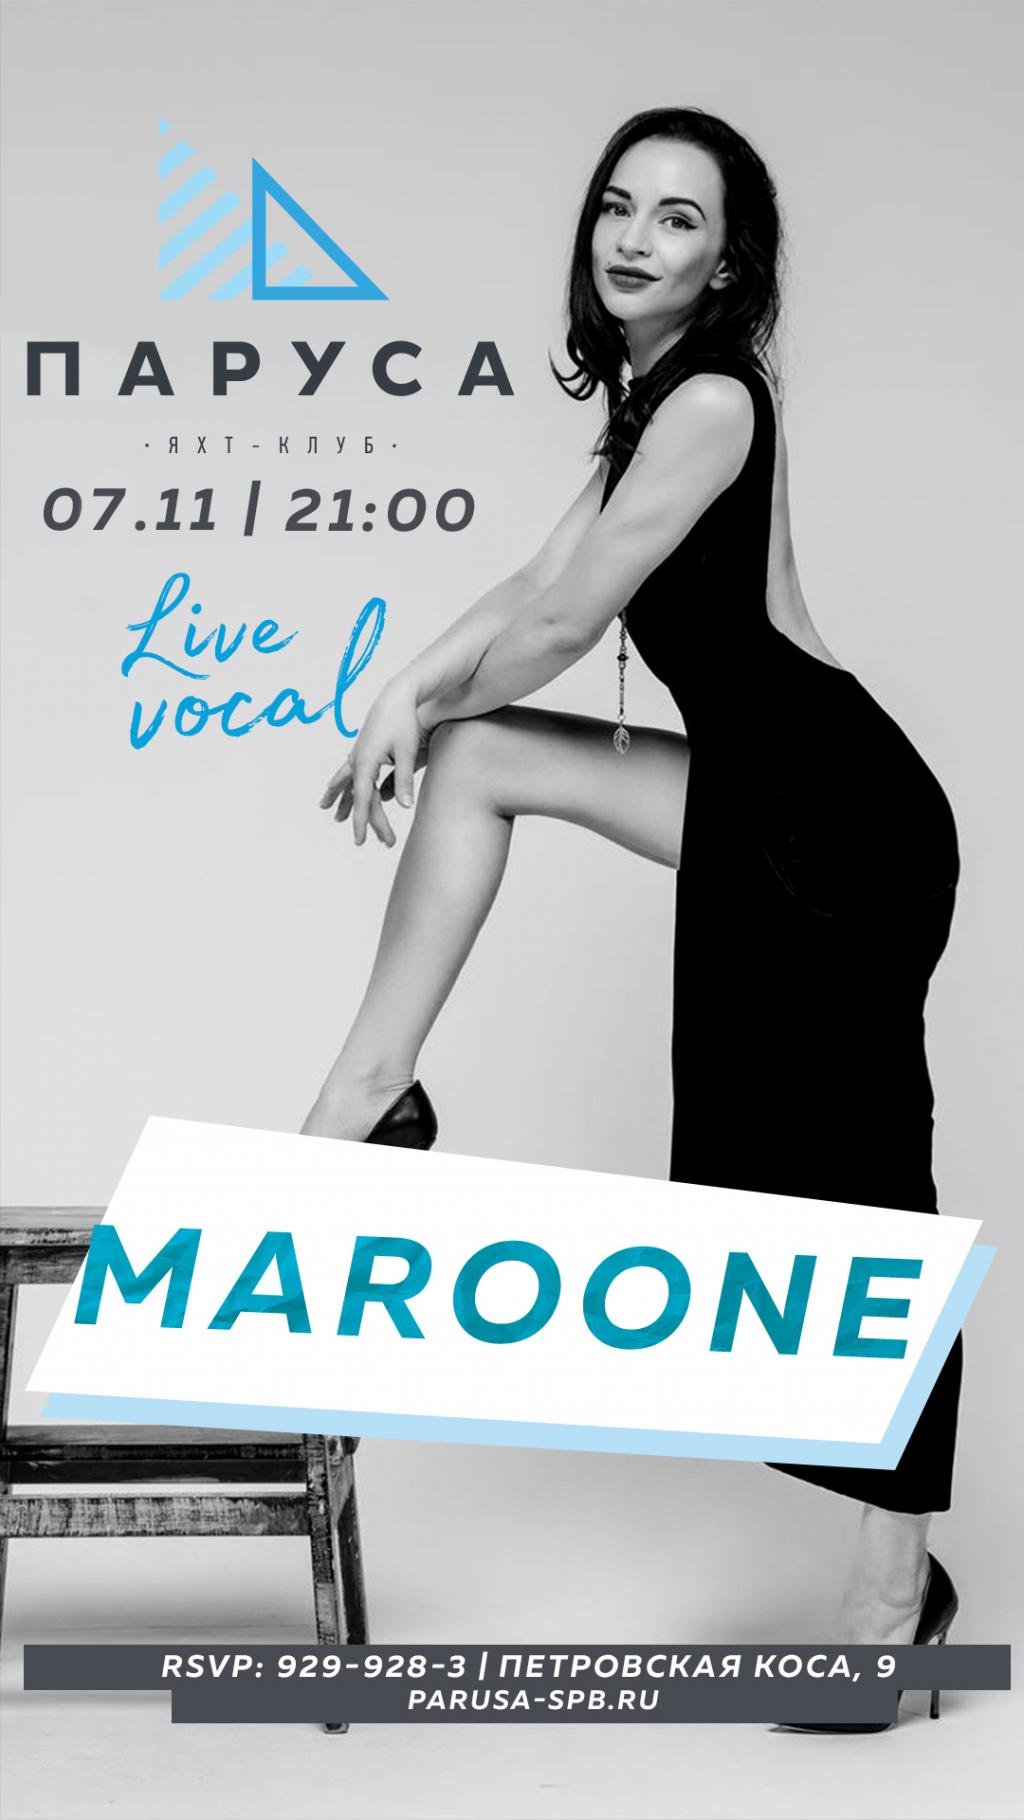 Special guest: - MAROONE- (live).